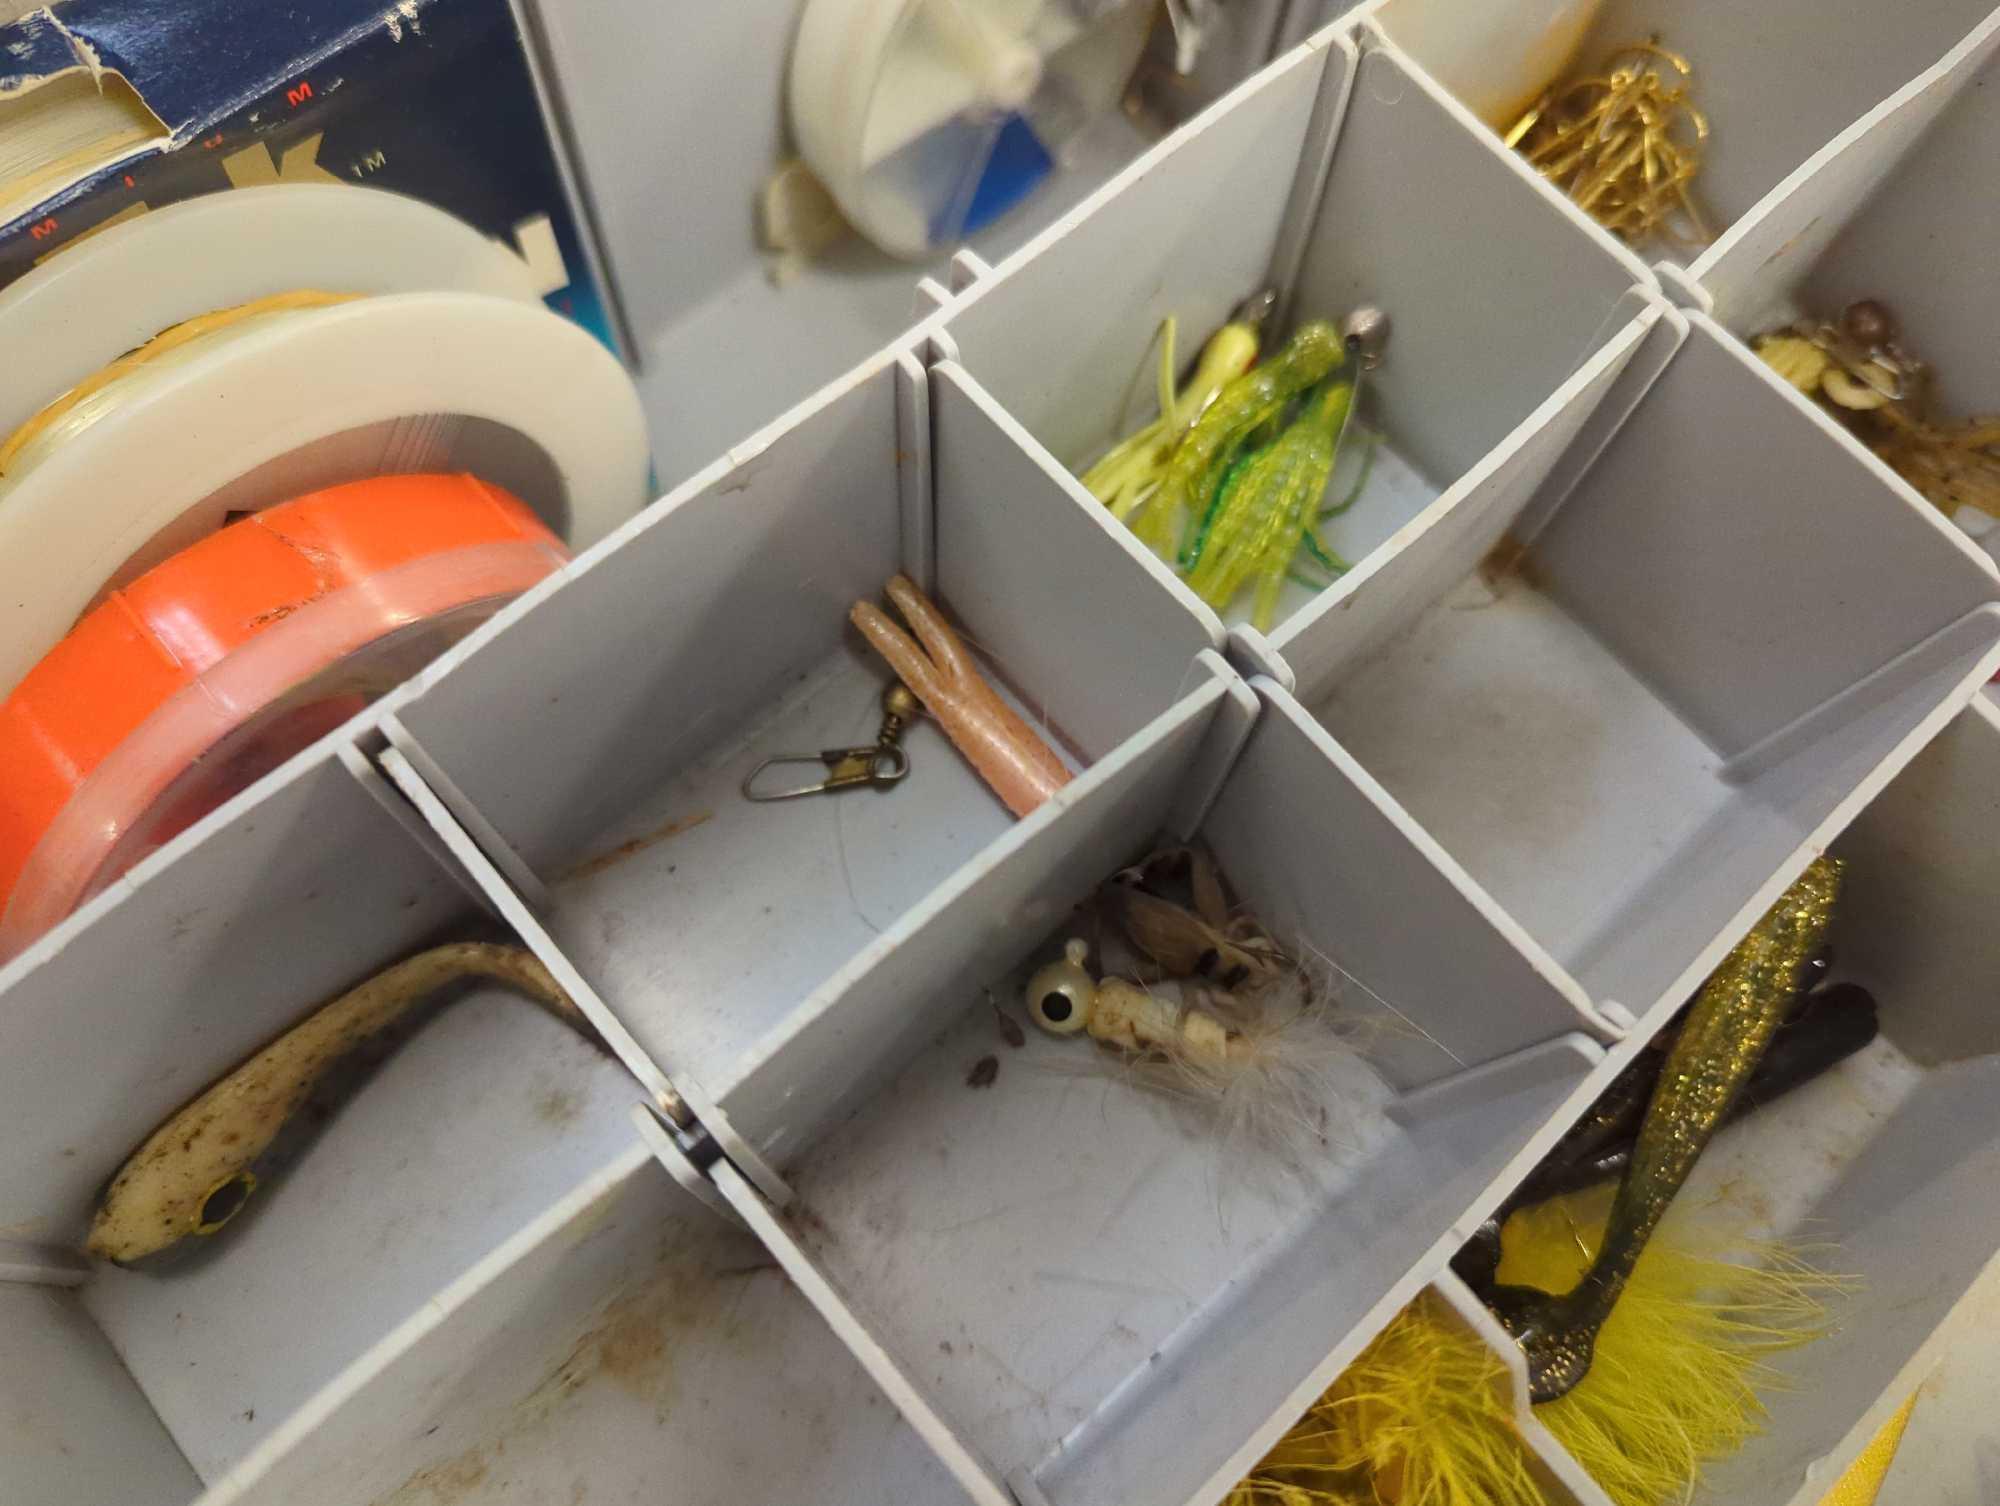 Tackle Box and contents includes a wire variety of fishing lures as are shown in photos. Comes as